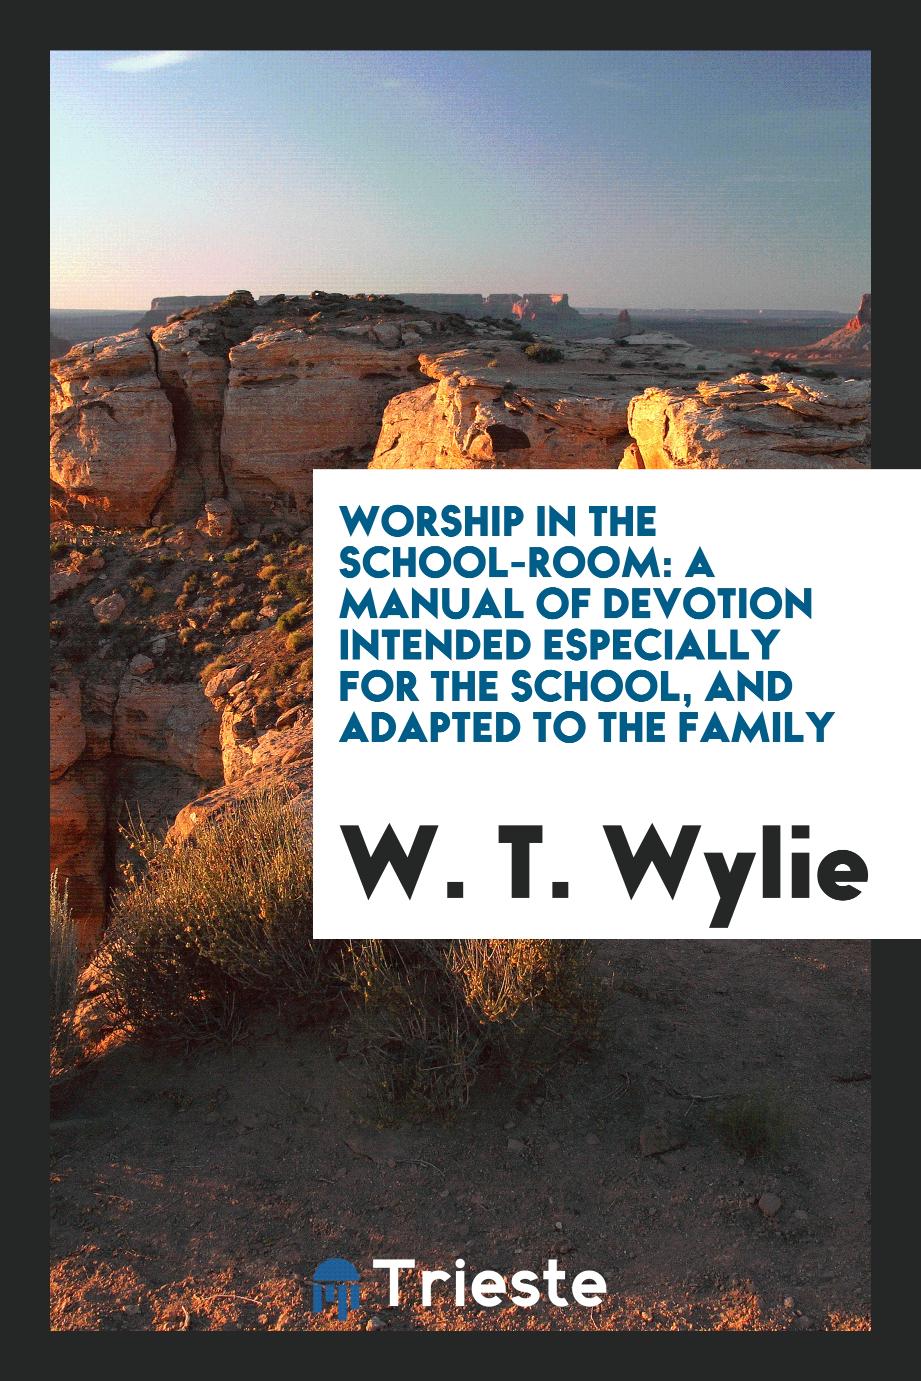 Worship in the School-Room: A Manual of Devotion Intended Especially for the School, and Adapted to the Family